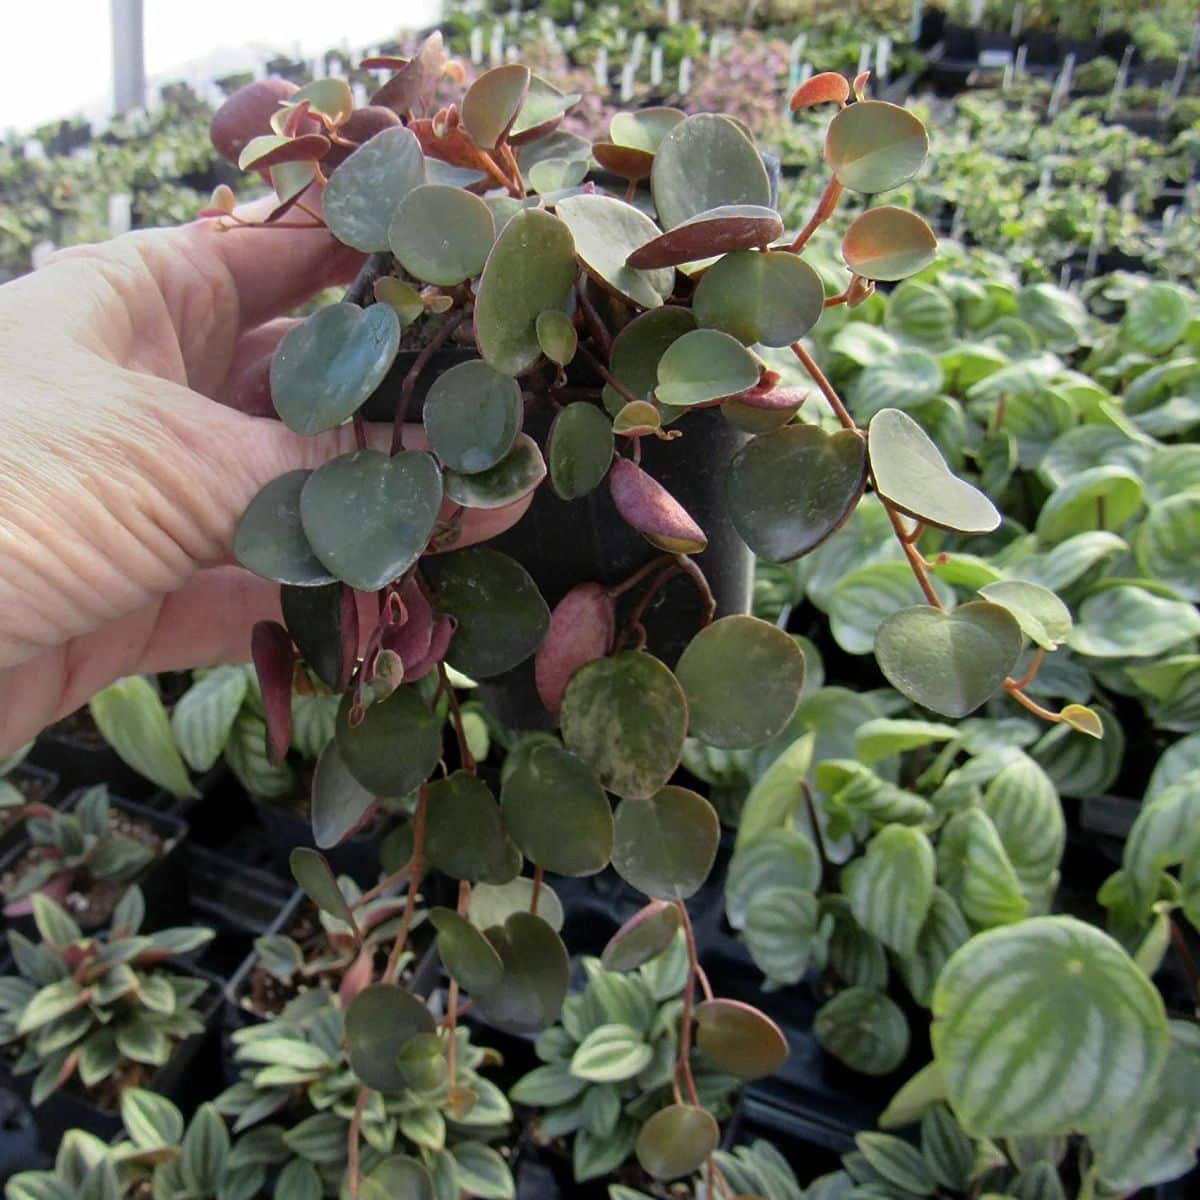 A Peperomia Ruby cascade seedling held by hand.